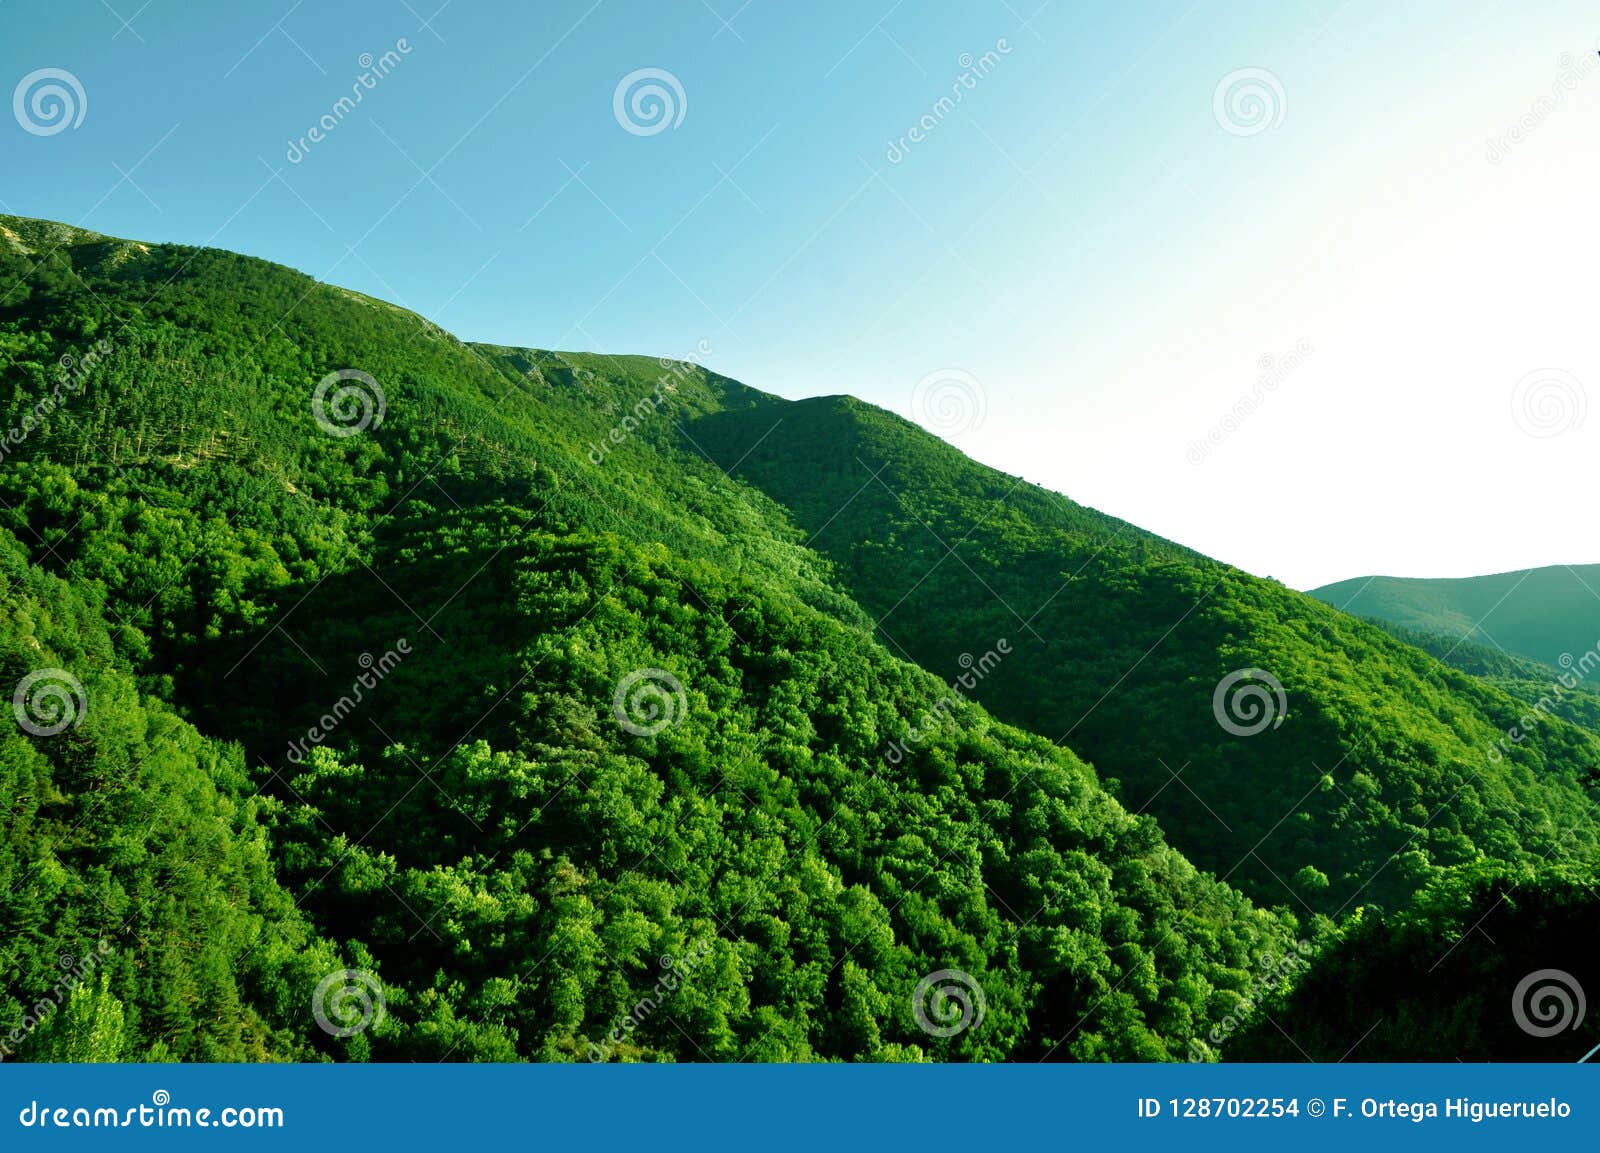 green forest on the mountain, nature, spain